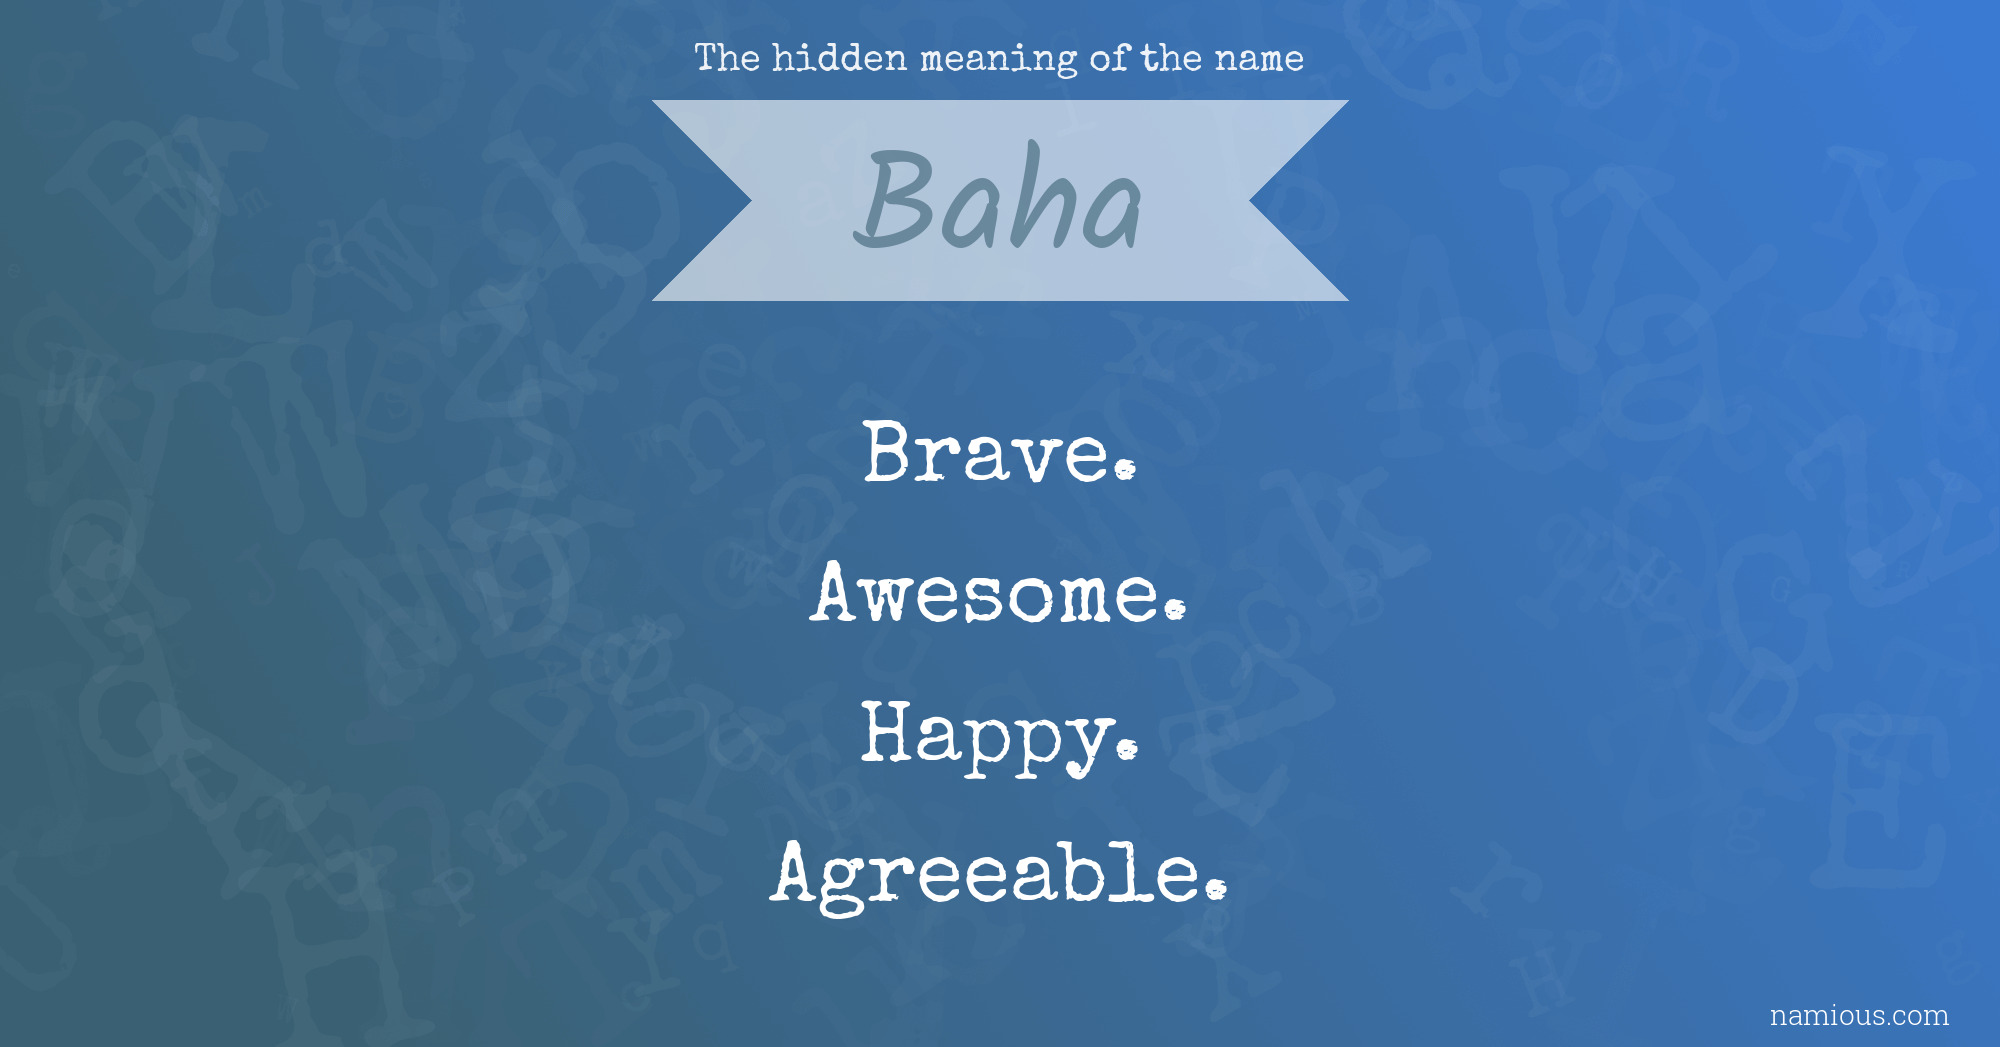 The hidden meaning of the name Baha